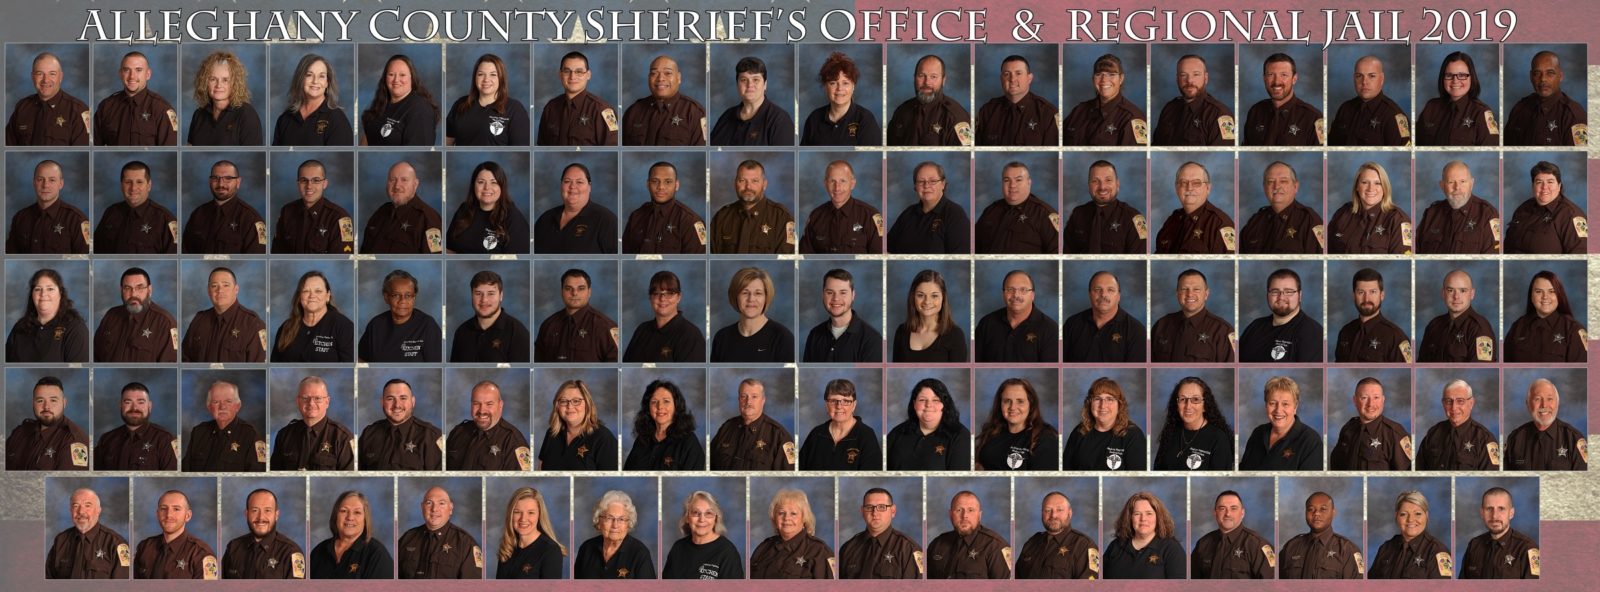 Alleghany County Sheriff Office and Regional Jail 2019